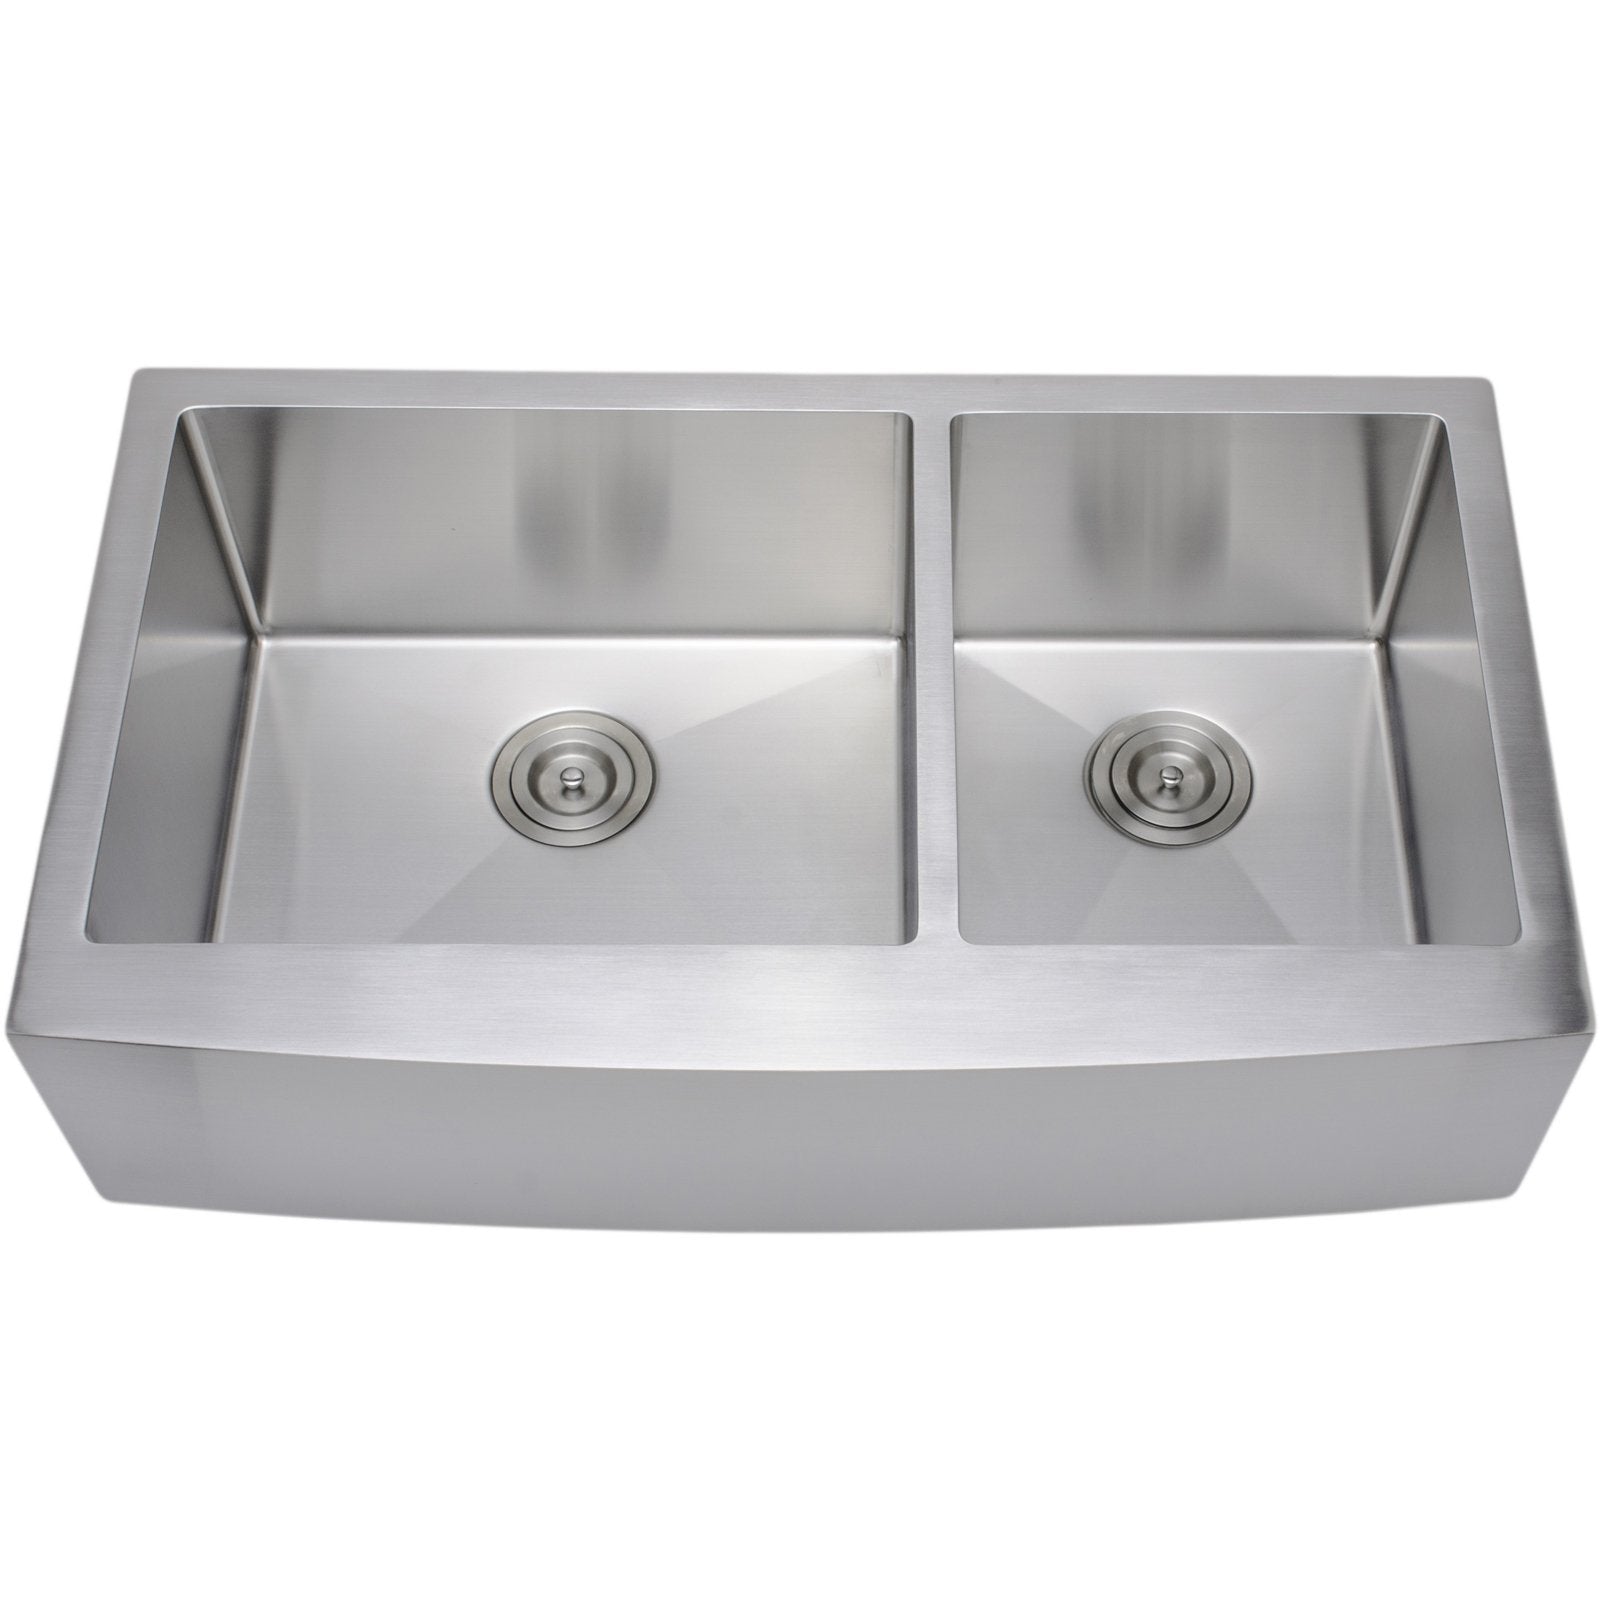 Wells Sinkware Handcrafted 36-Inch 16-Gauge Arched Apron Front Farmhouse 60/40 Double Bowl Stainless Steel Kitchen Sink-DirectSinks